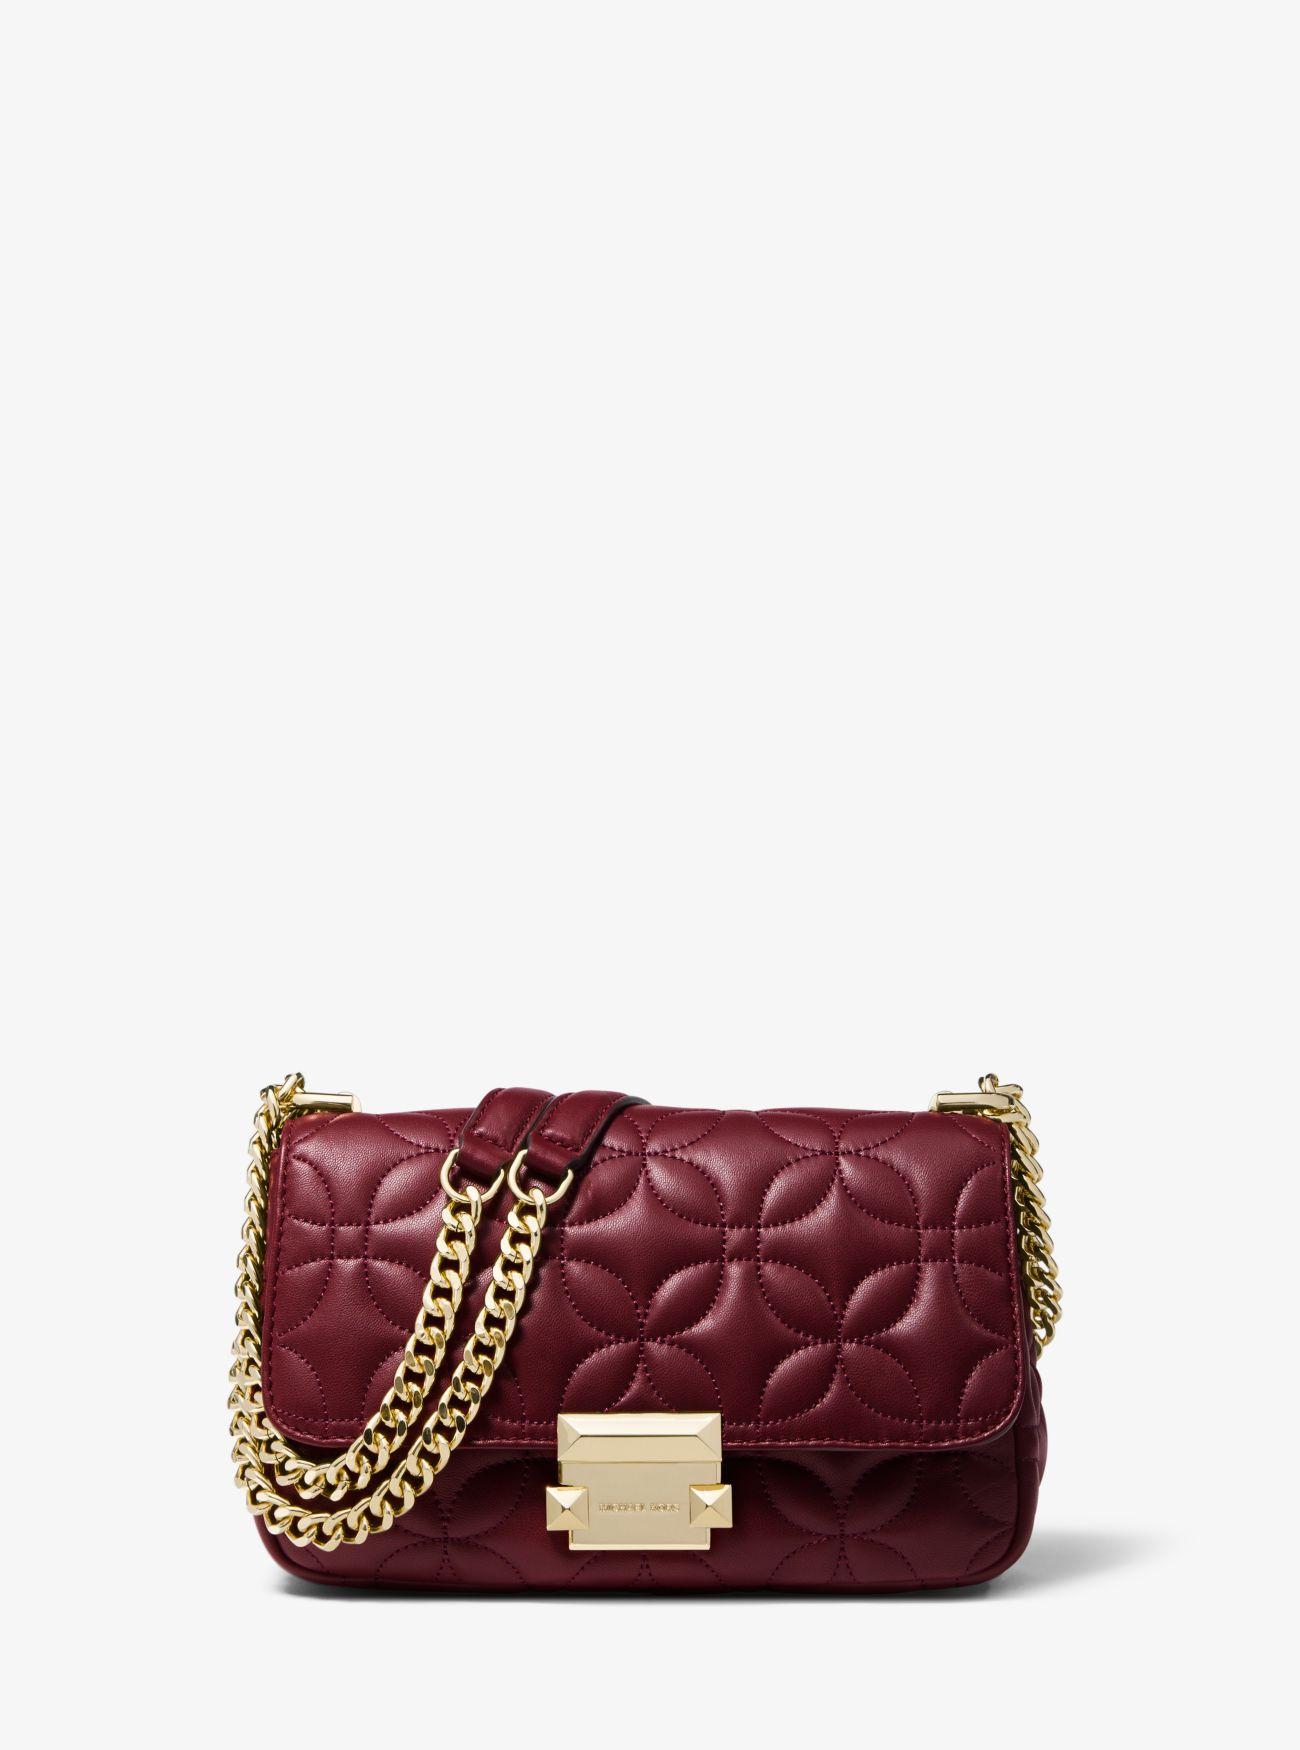 MICHAEL Michael Kors Sloan Small Floral Quilted Leather Shoulder Bag in Oxblood (Red) - Lyst